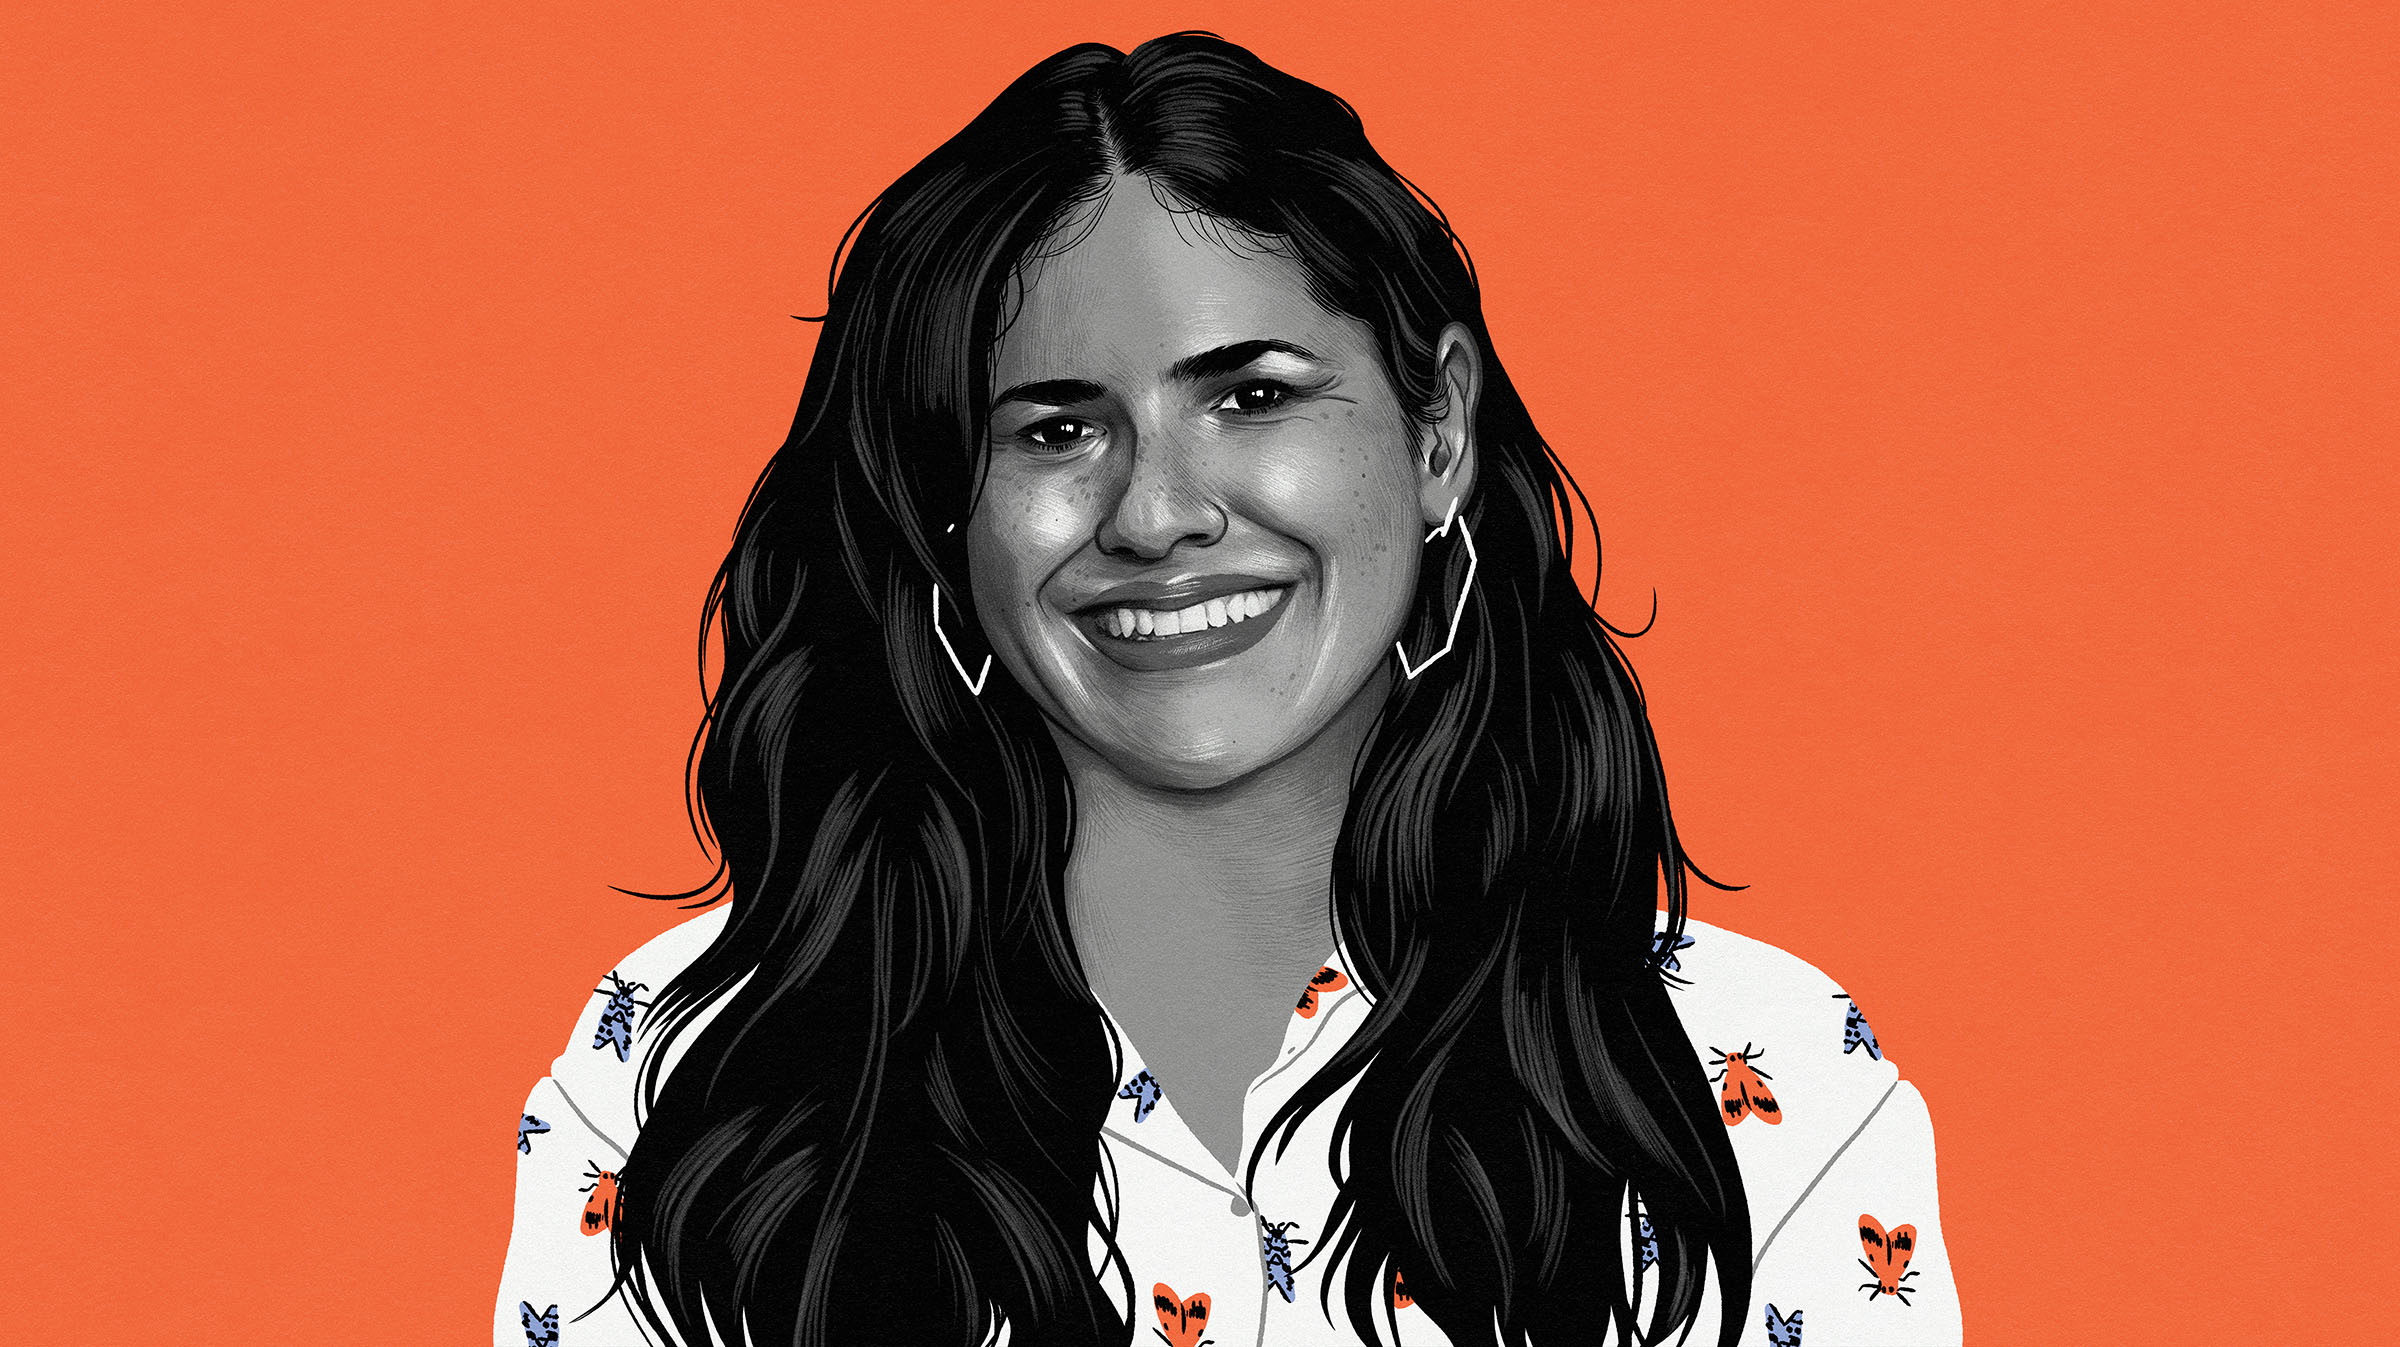 An illustration of a woman with long dark hair wearing a white shirt, on an orange background